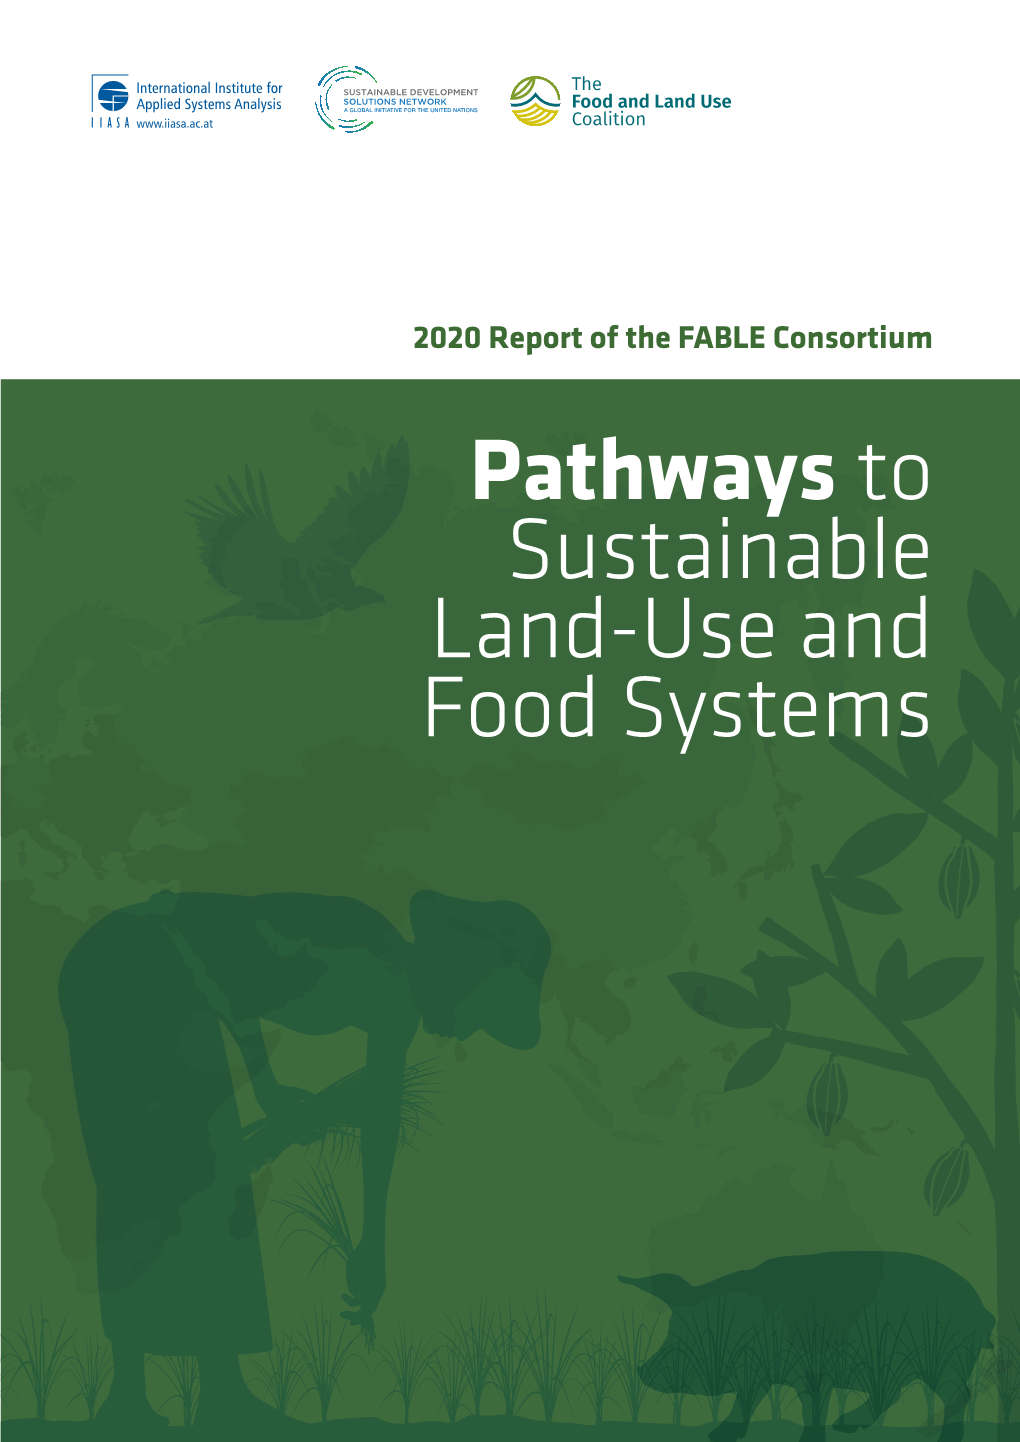 Sweden by 2050” In: FABLE 2020, Pathways to Sustainable Land-Use and Food Systems, 2020 Report of the FABLE Consortium